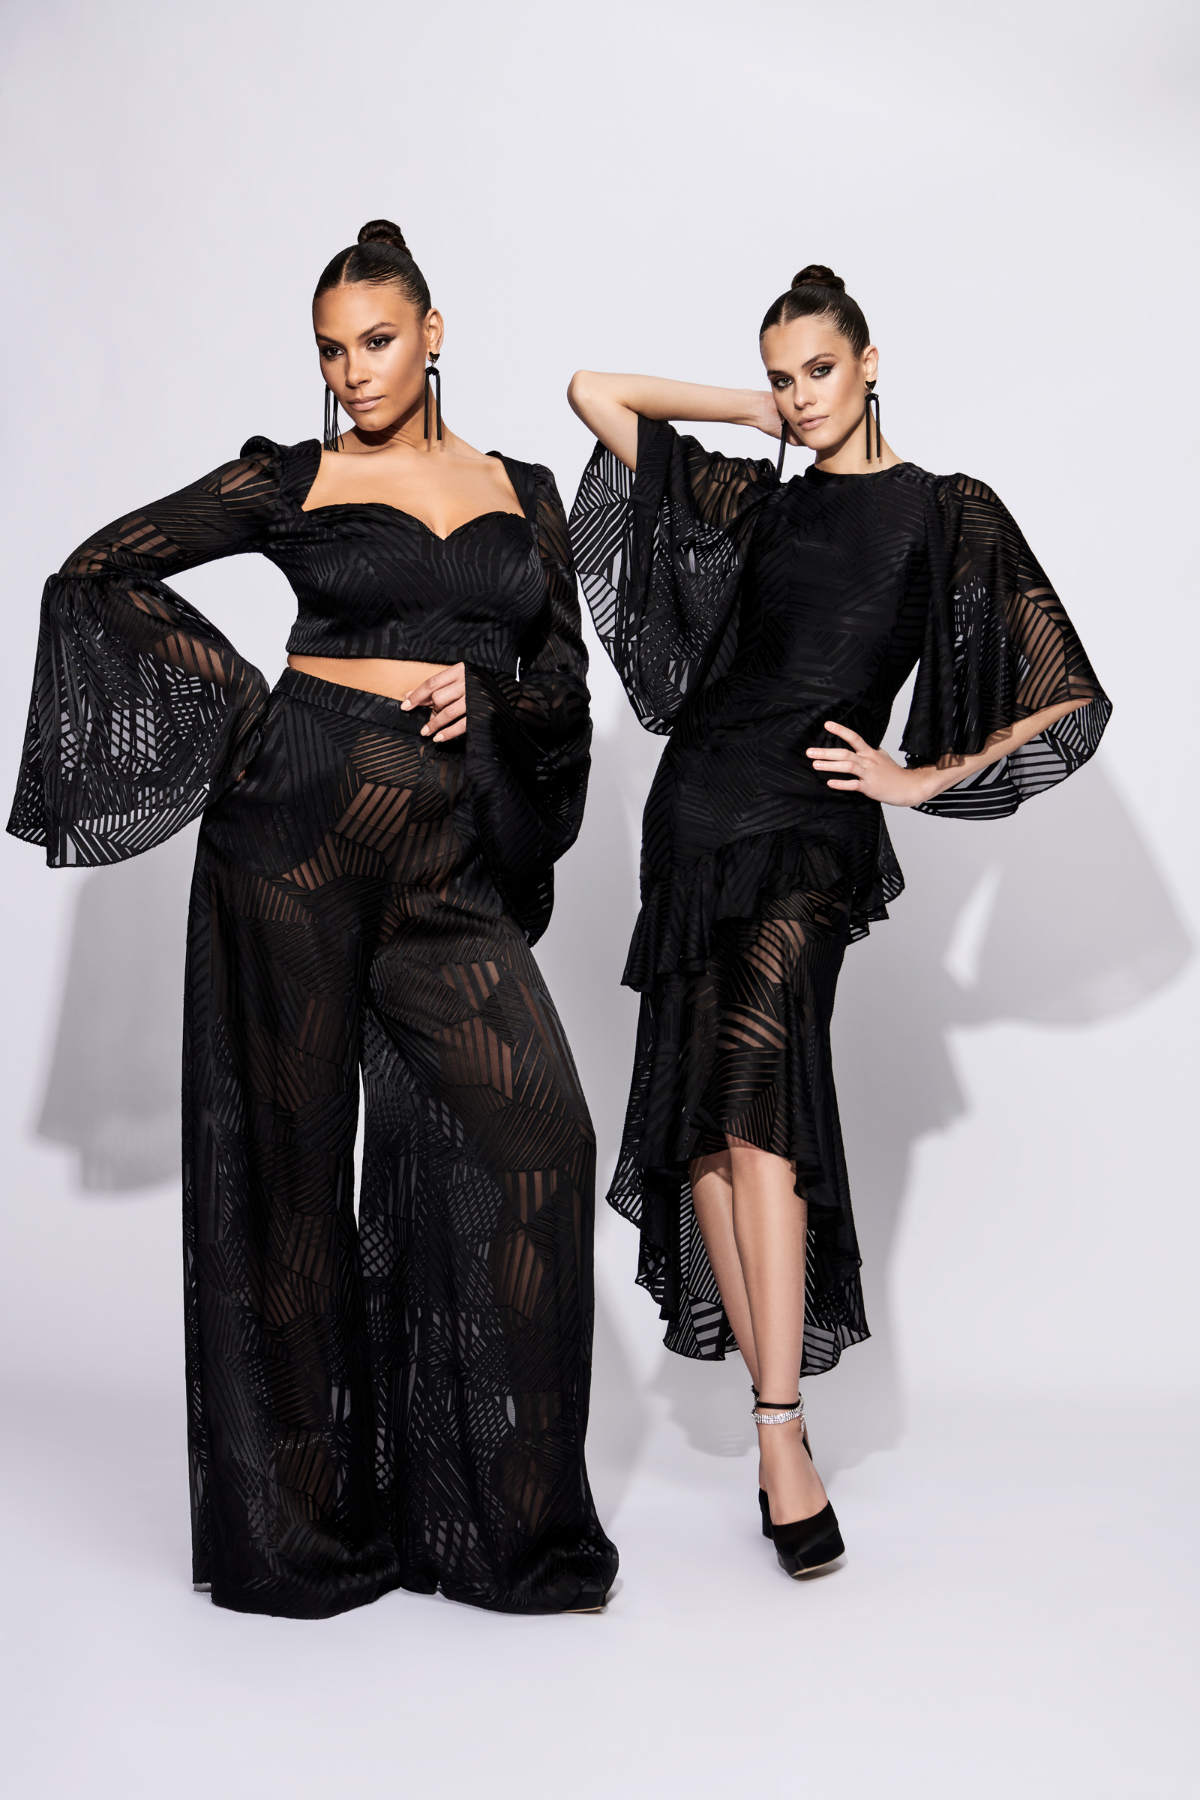 Christian Siriano Presents His New Pre–Fall 2023 Collection